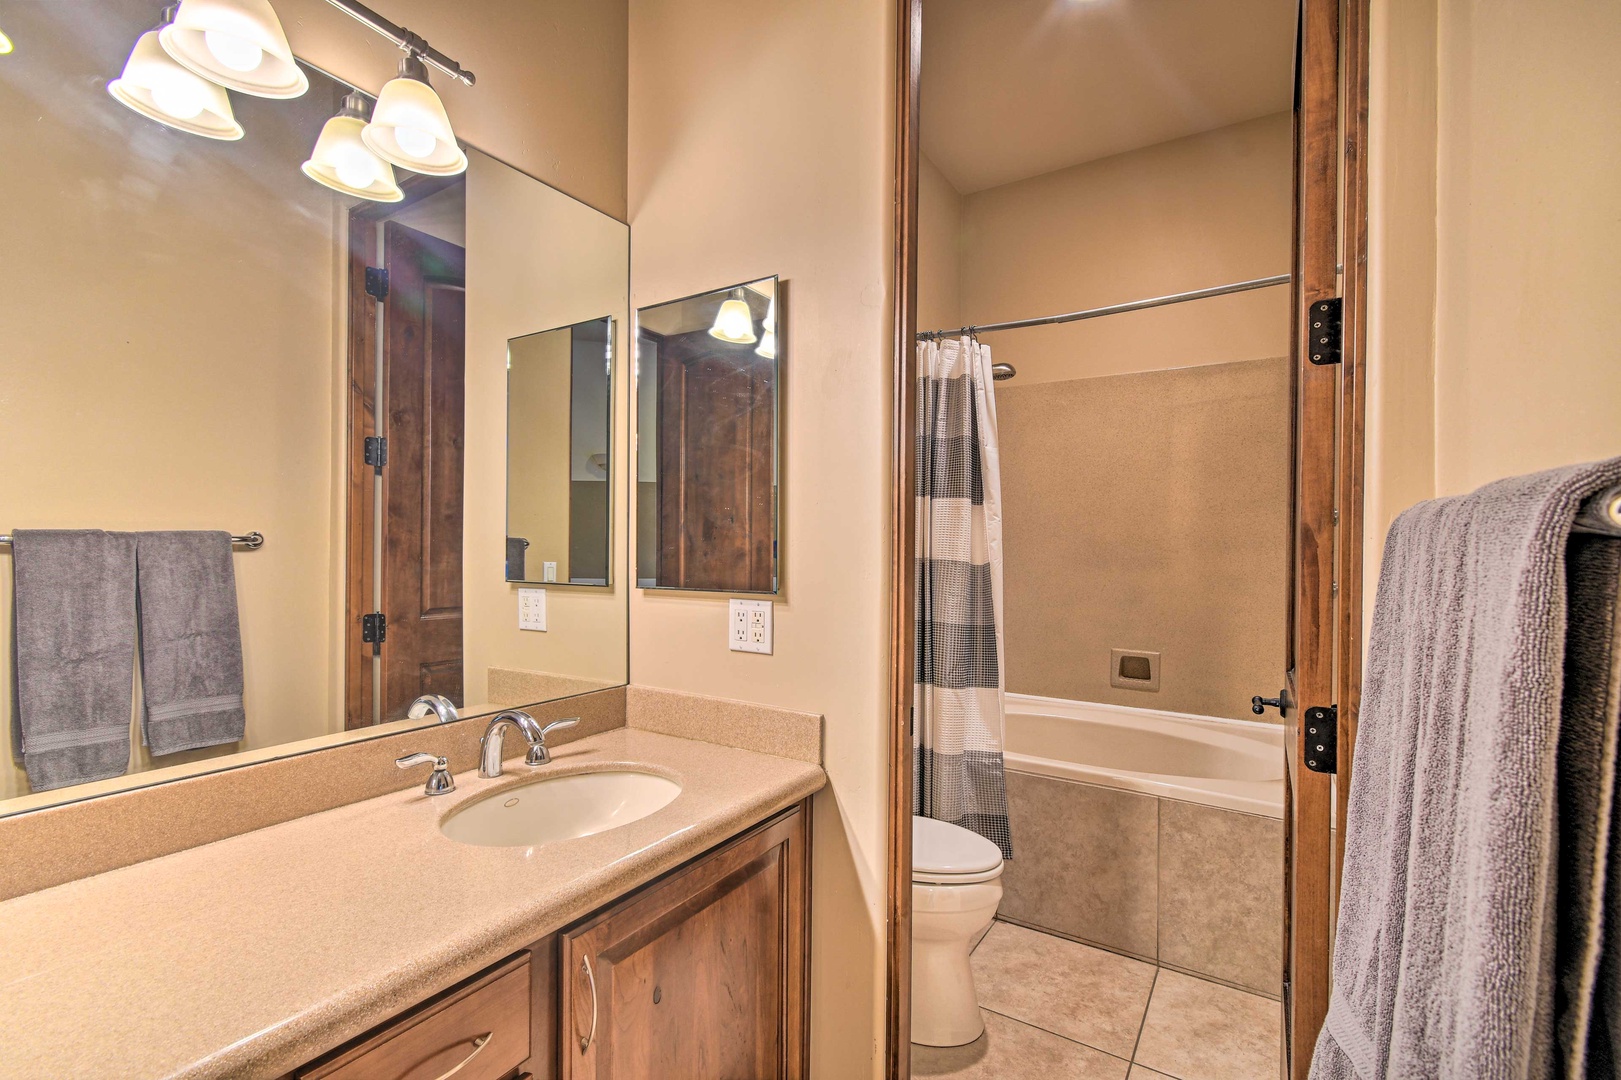 This shared full bath offers a large vanity & shower/tub combo